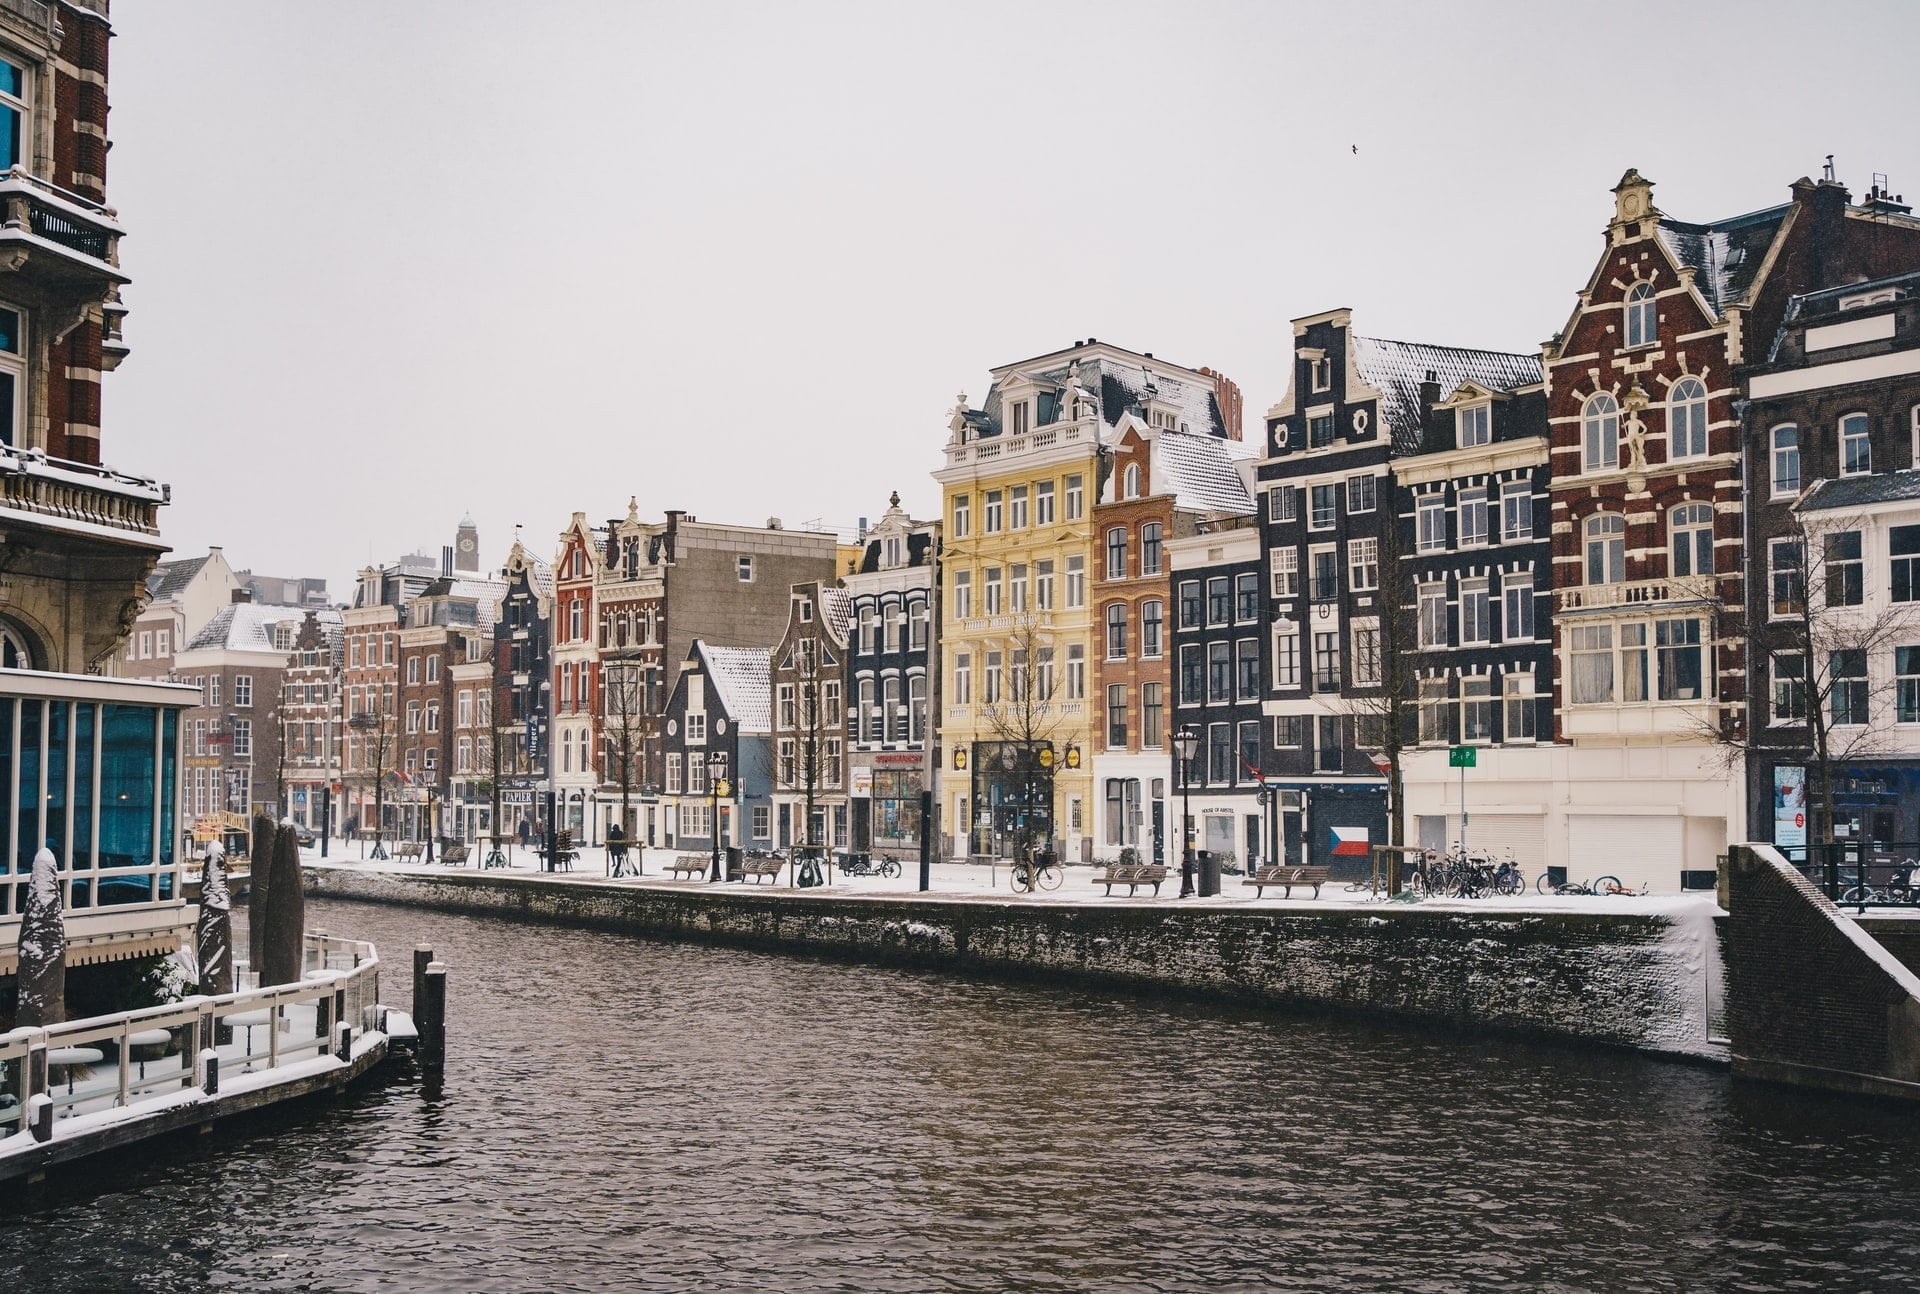 According to the most recent report from the Netherlands Bureau for Economic Policy Analysis (CPB), the cost of living in the Netherlands will rise by 5.2 percent in 2022 as a result of the Ukraine conflict and rising energy prices.